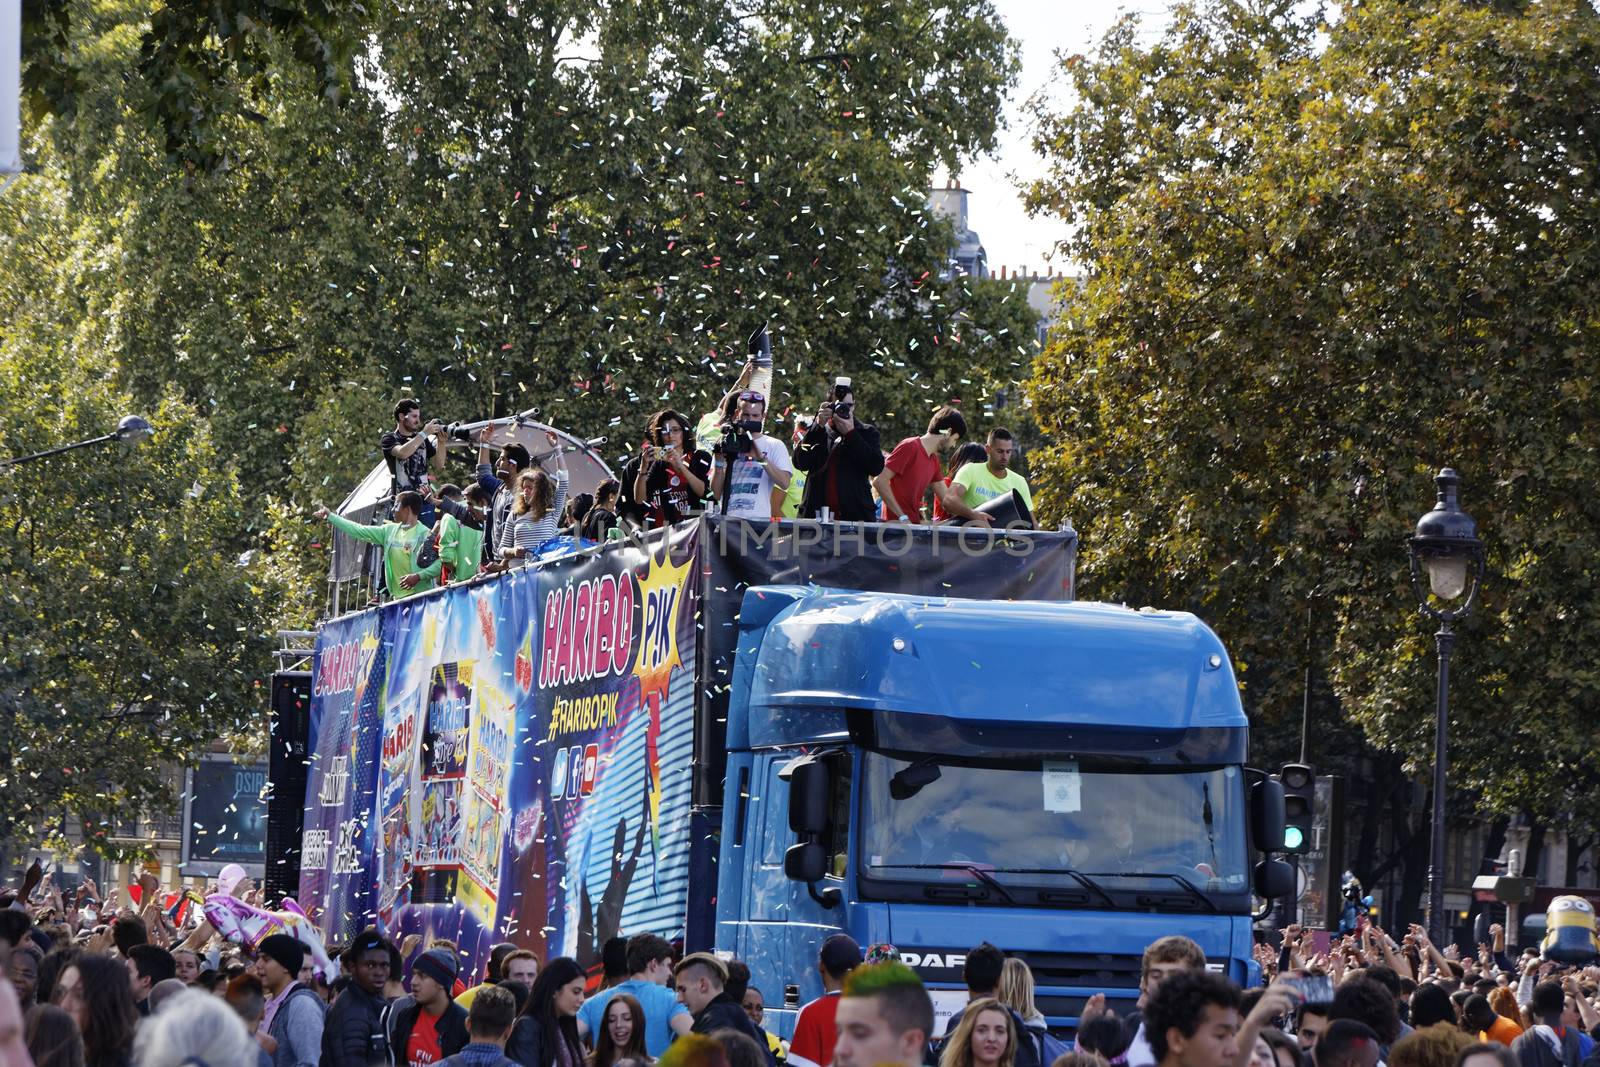 FRANCE, Paris: A float is seen during the 17th Techno Parade music event in Paris on September 19, 2015.